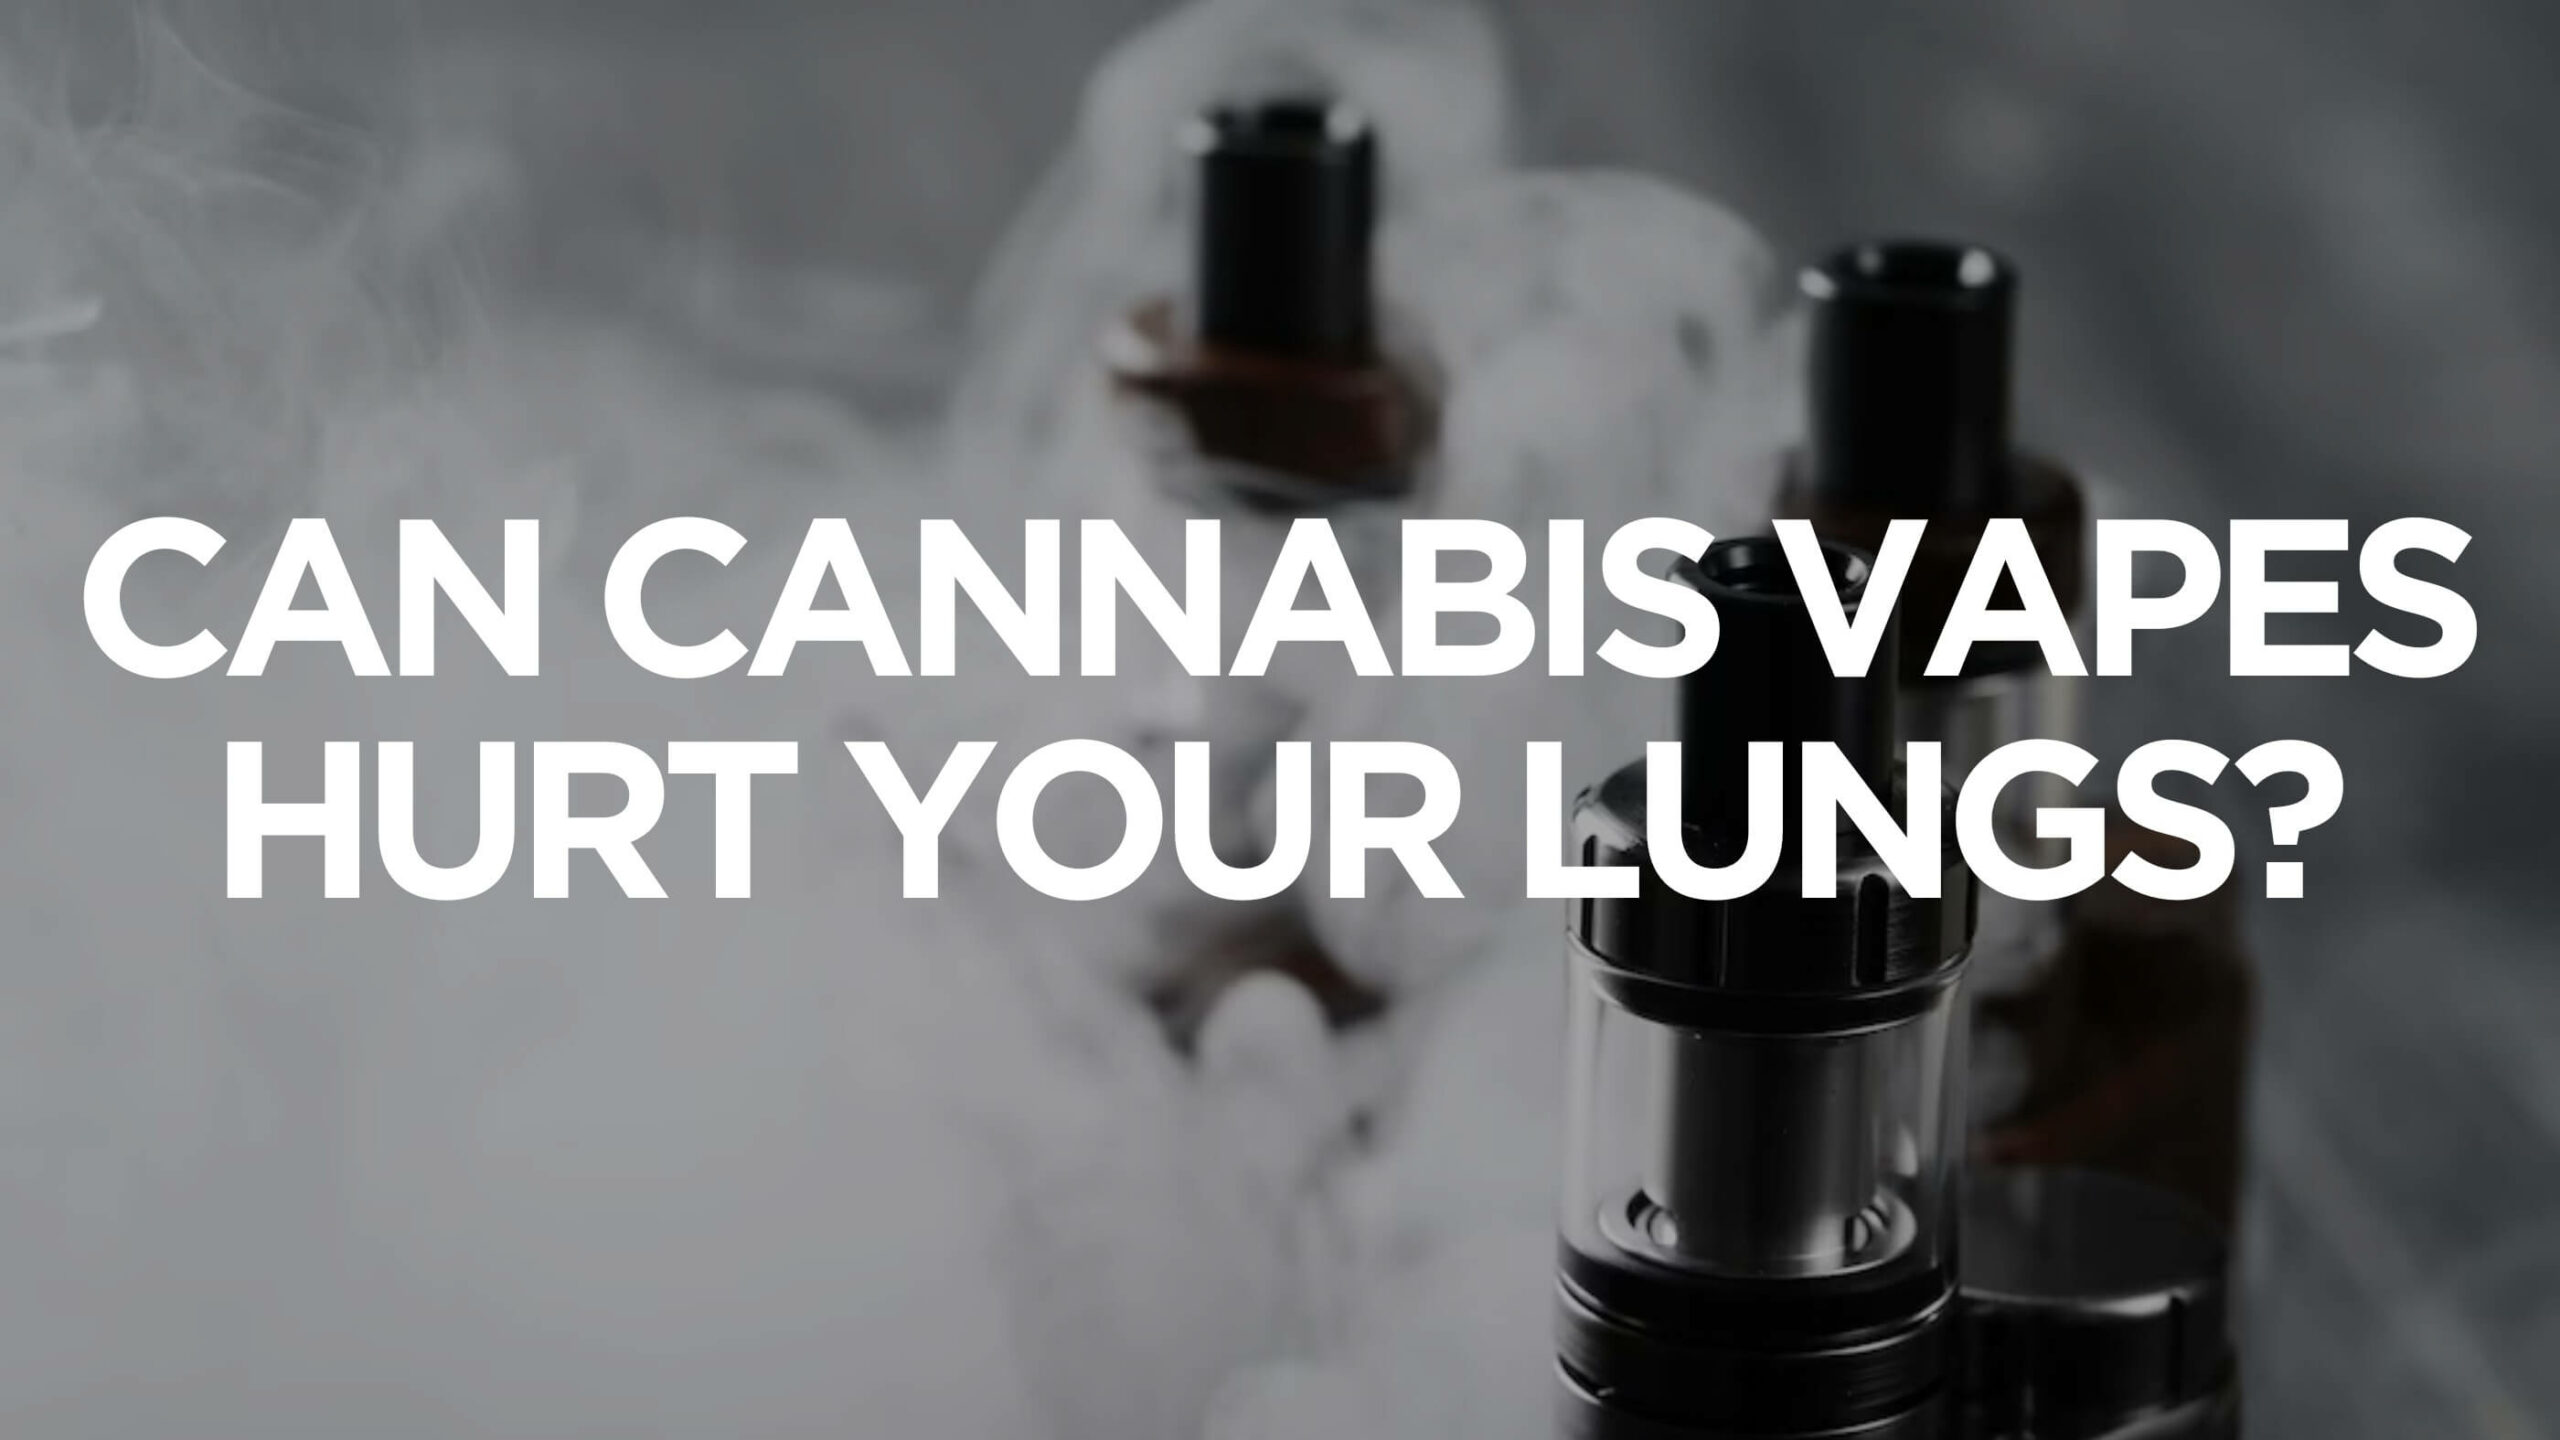 Can Cannabis Vapes Hurt Your Lungs